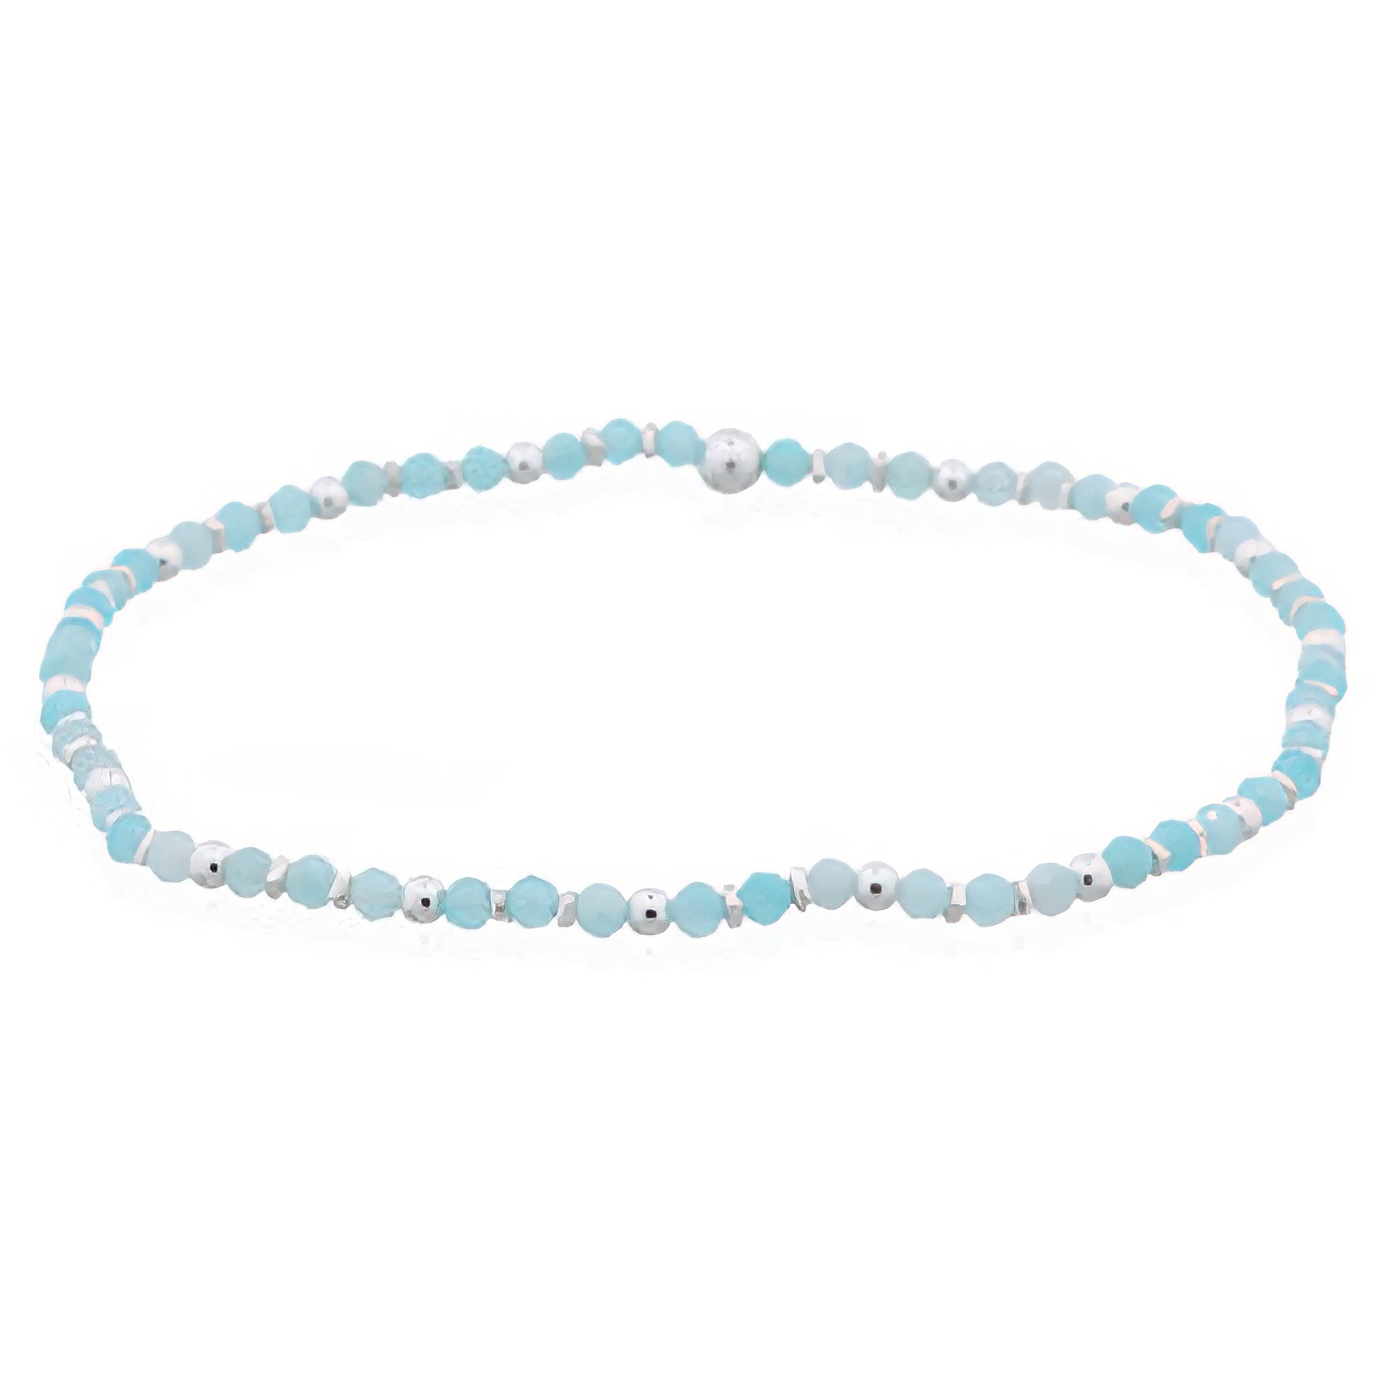 Amazonite With Round Beads Silver Spacer Stretchable Bracelet by BeYindi 